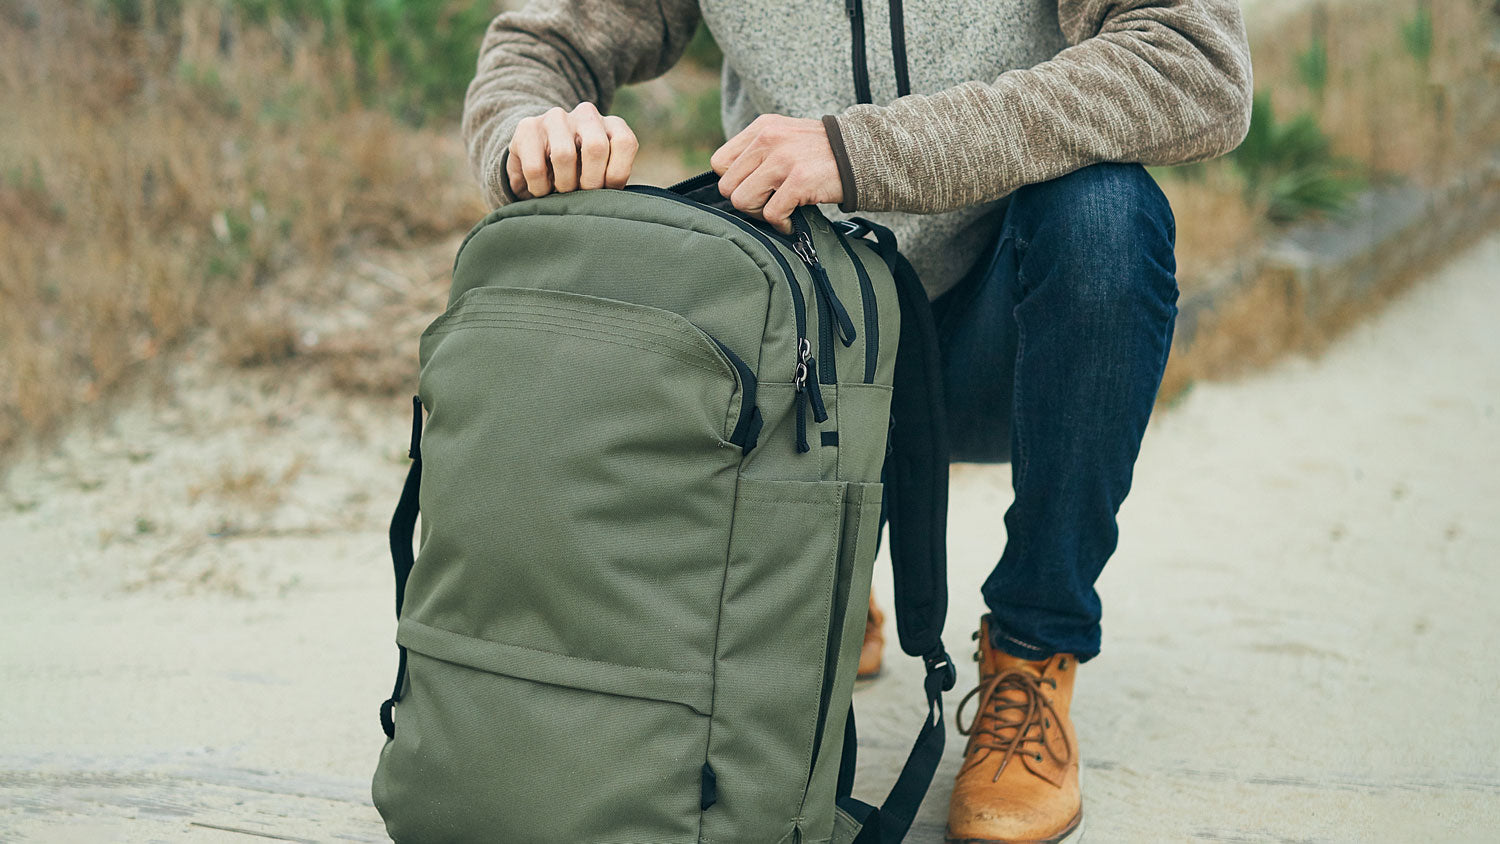 The Pakt Travel Backpack in Green